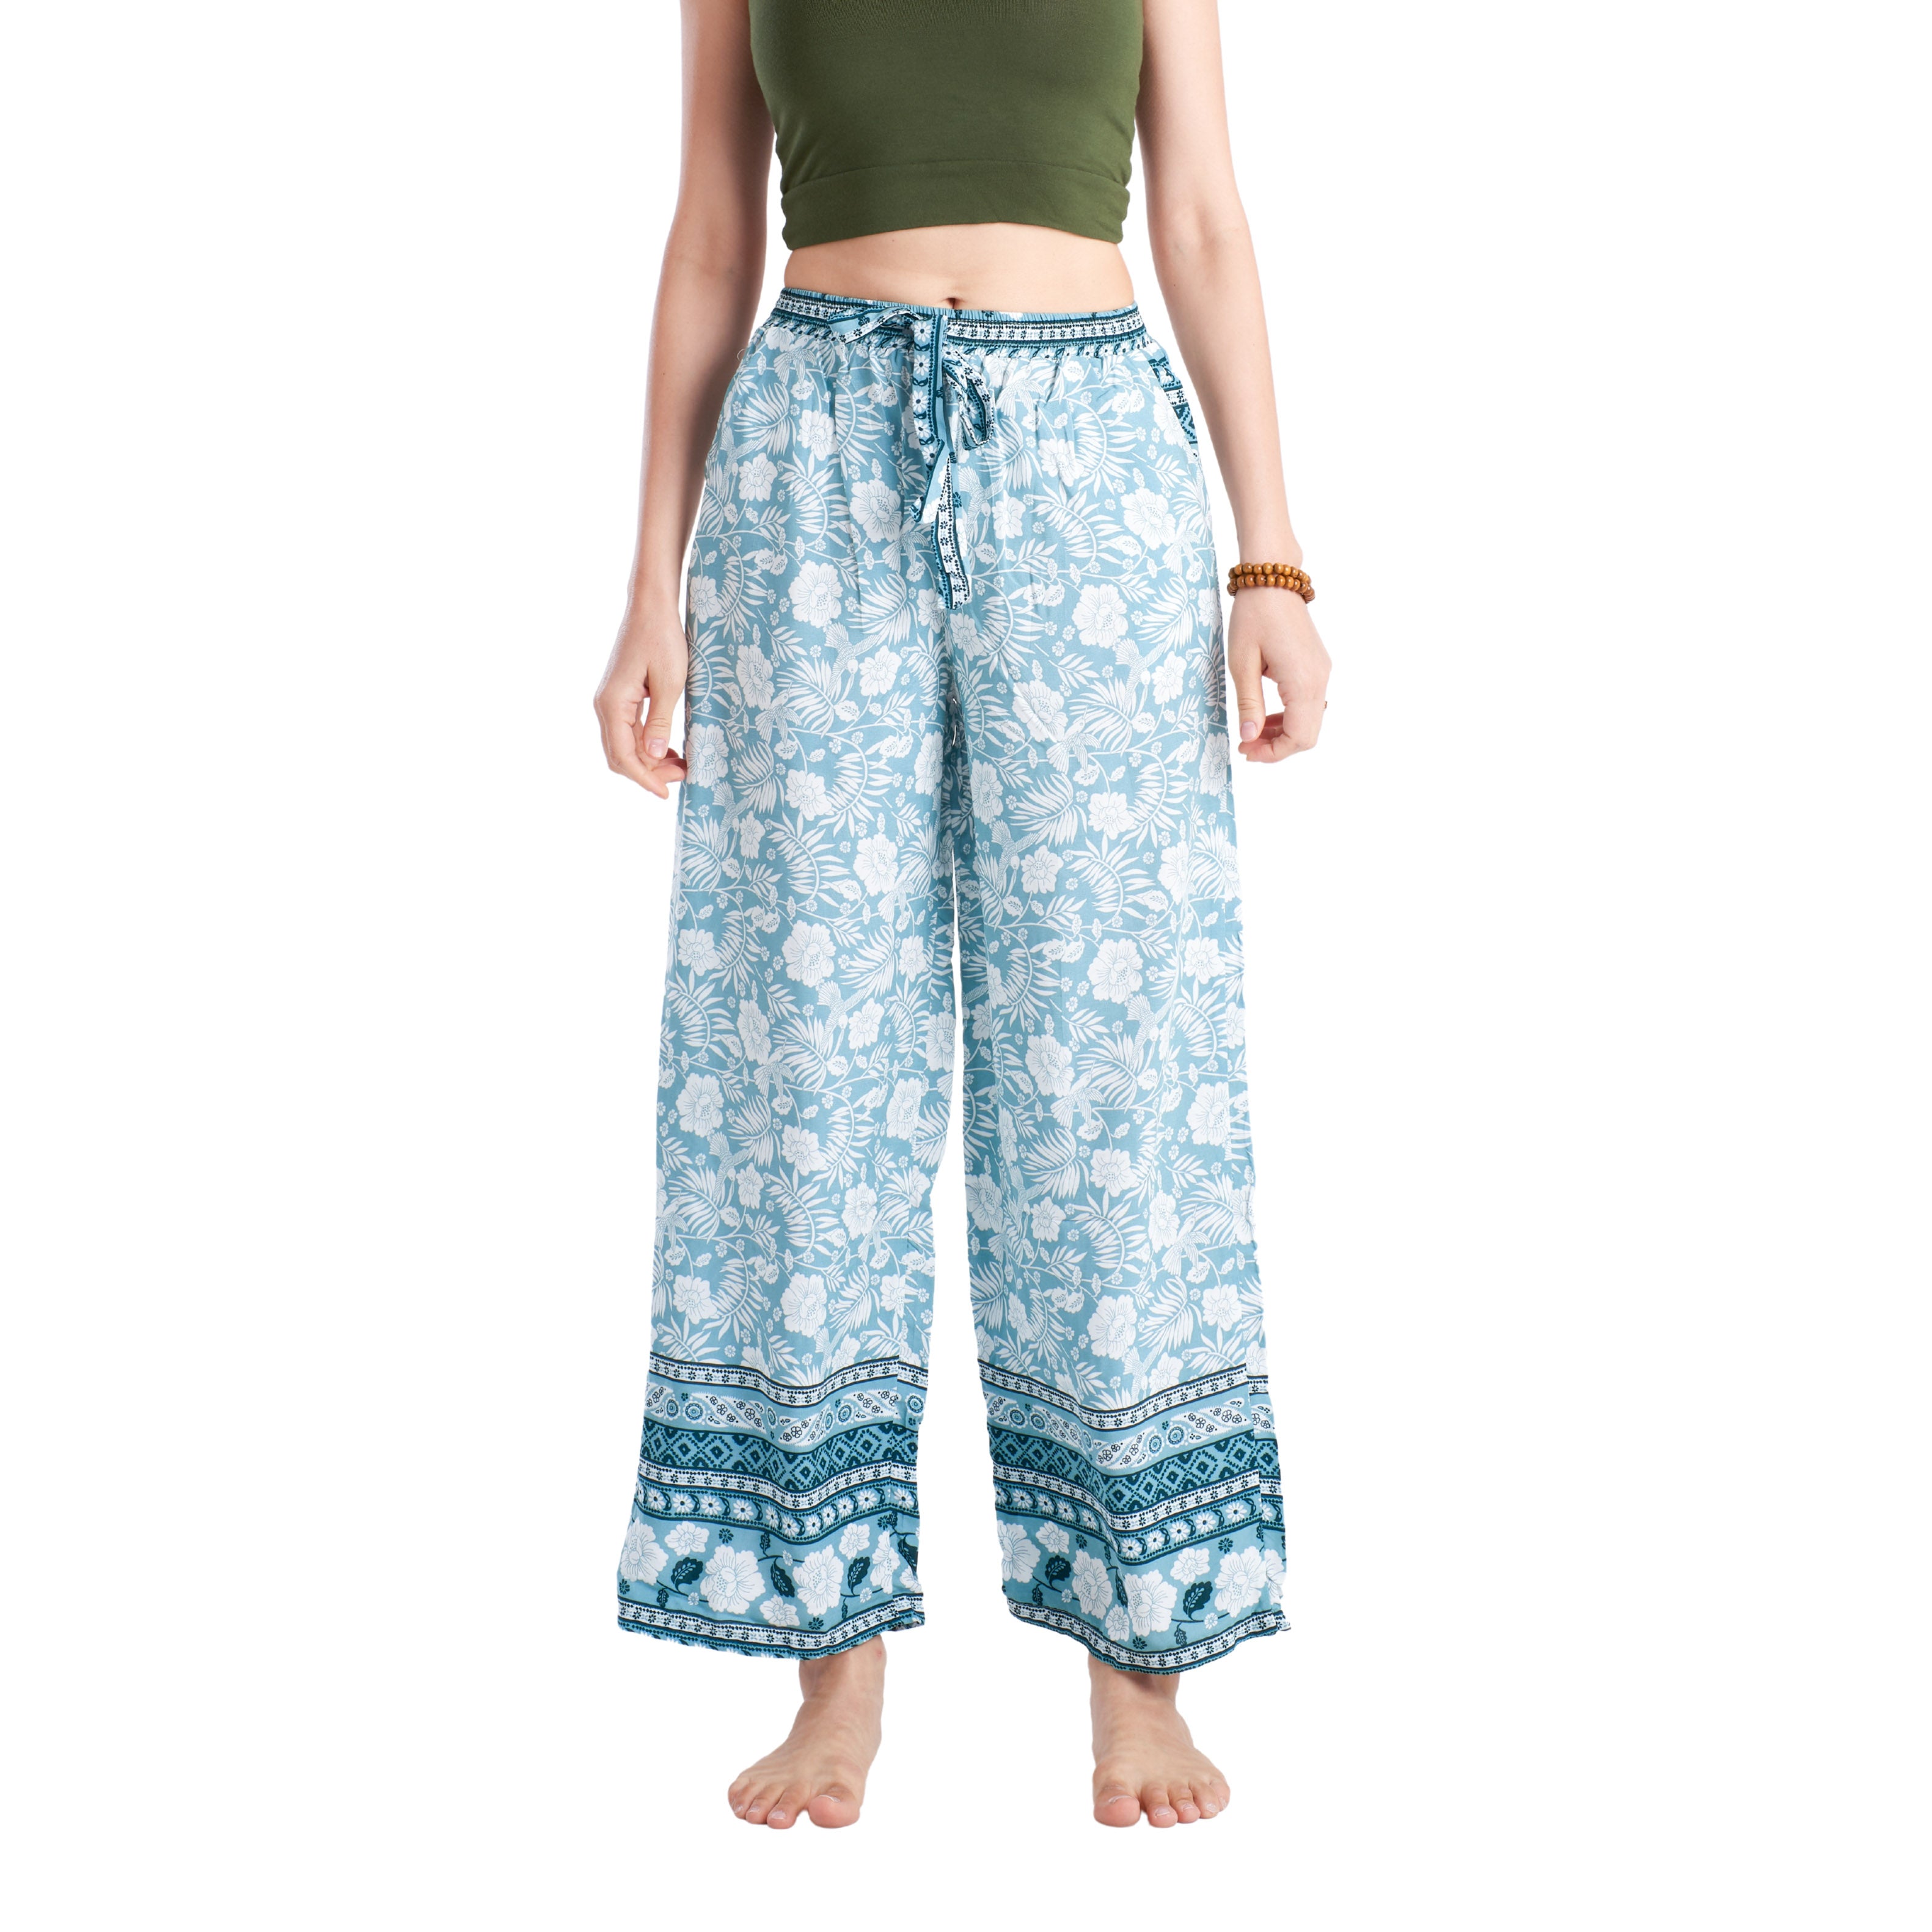 KUXTAL PANTS Elepanta Casual Pants - Buy Today Elephant Pants Jewelry And Bohemian Clothes Handmade In Thailand Help To Save The Elephants FairTrade And Vegan